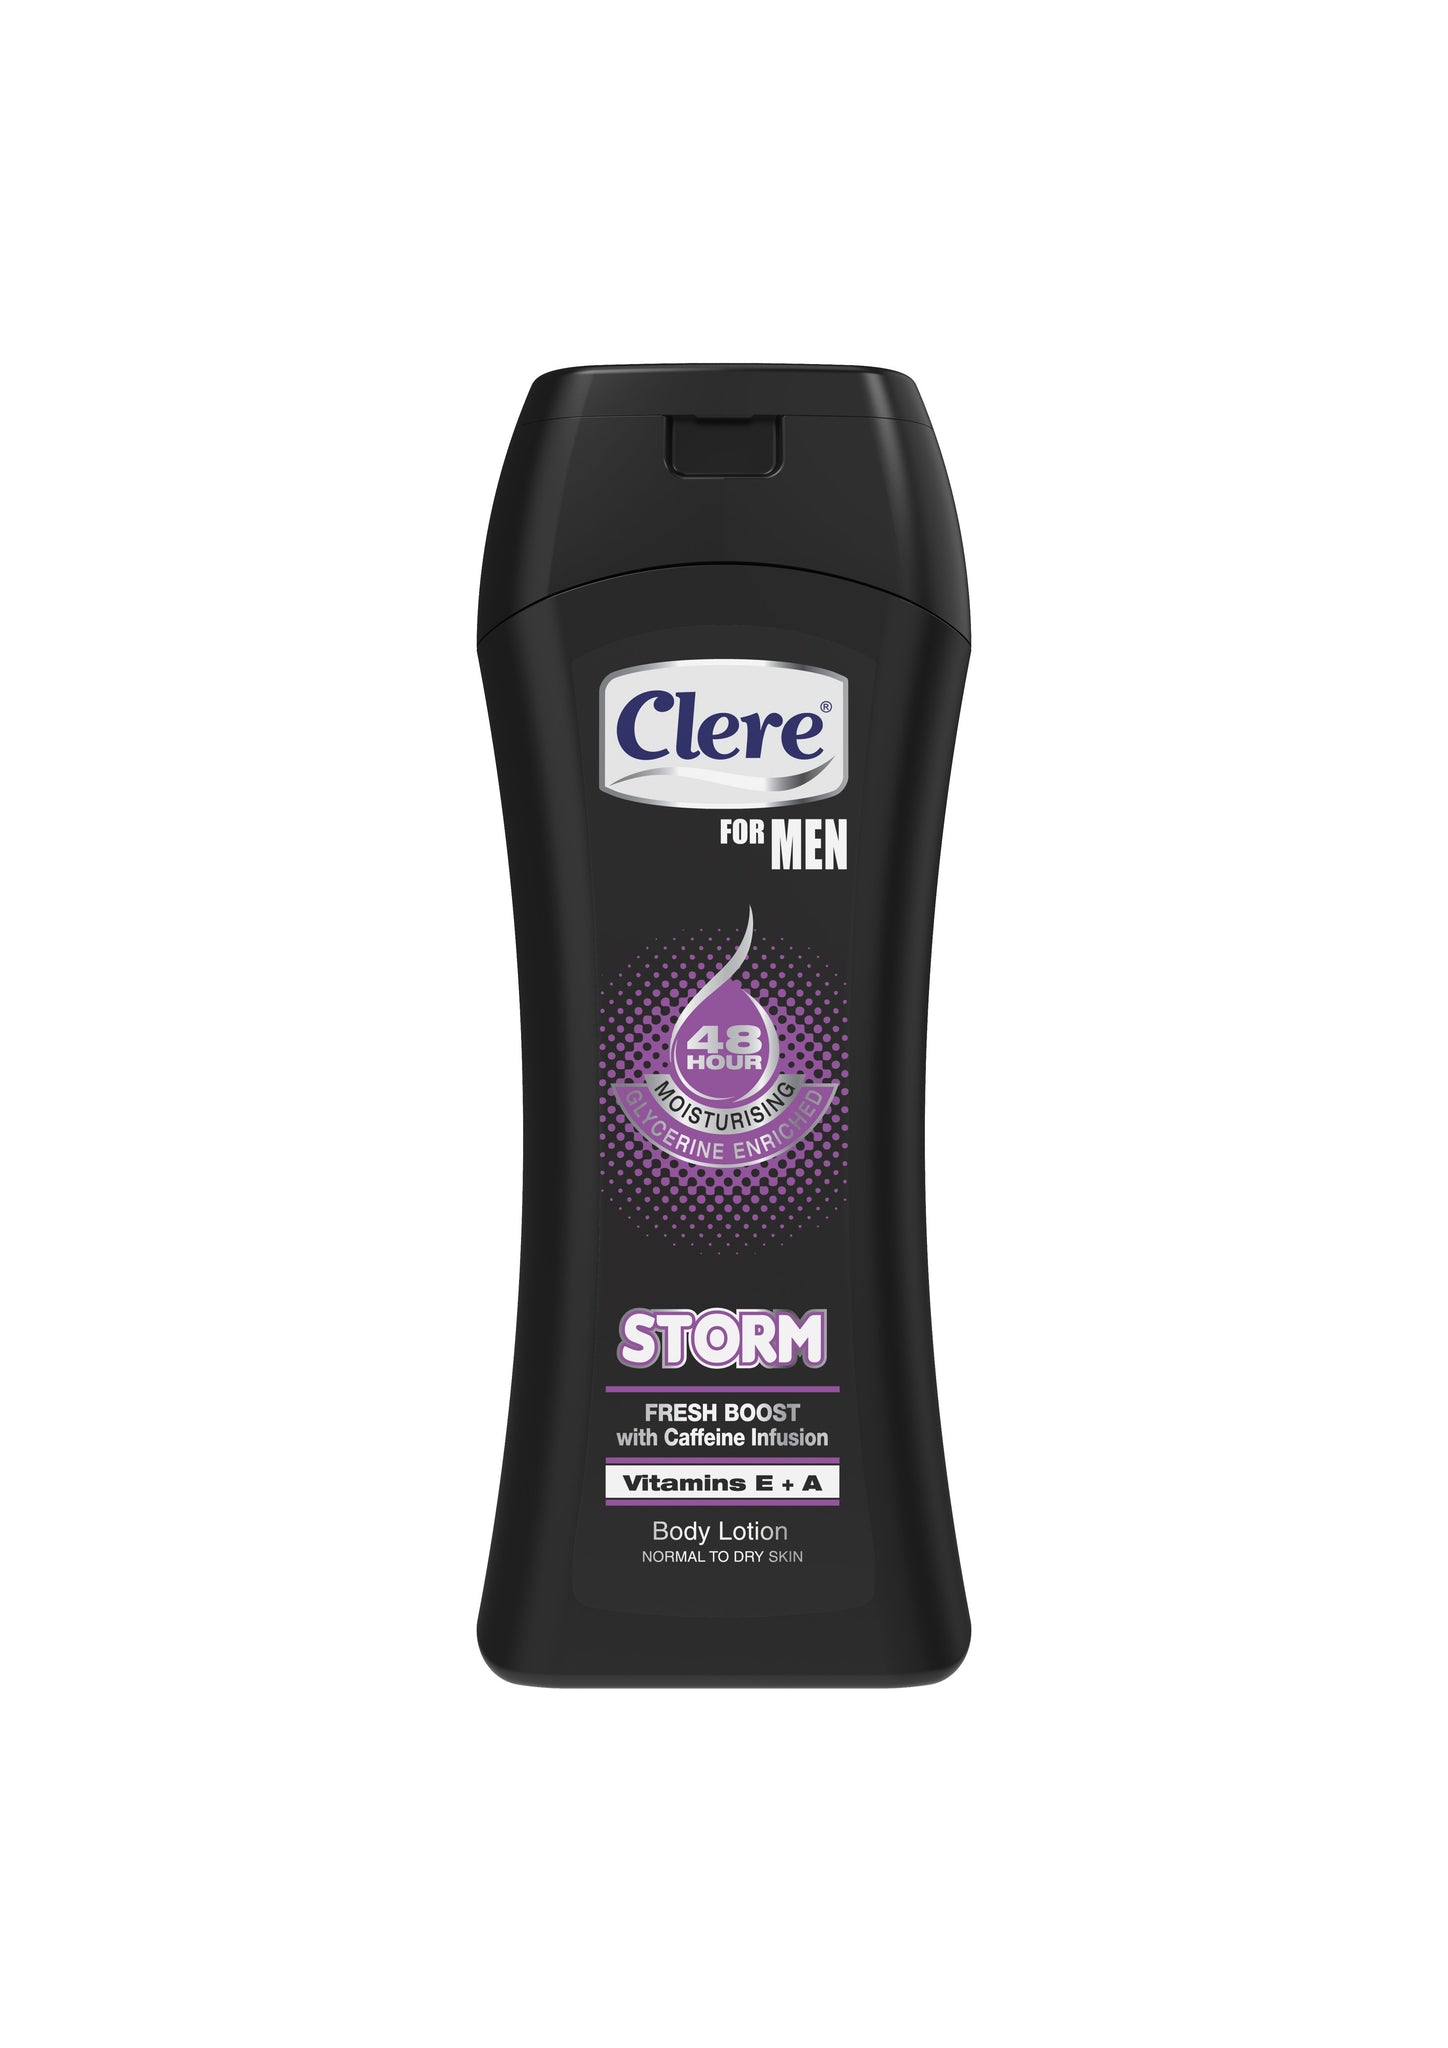 Clere For Men Body Lotion - STORM - 200ml 24-Pack